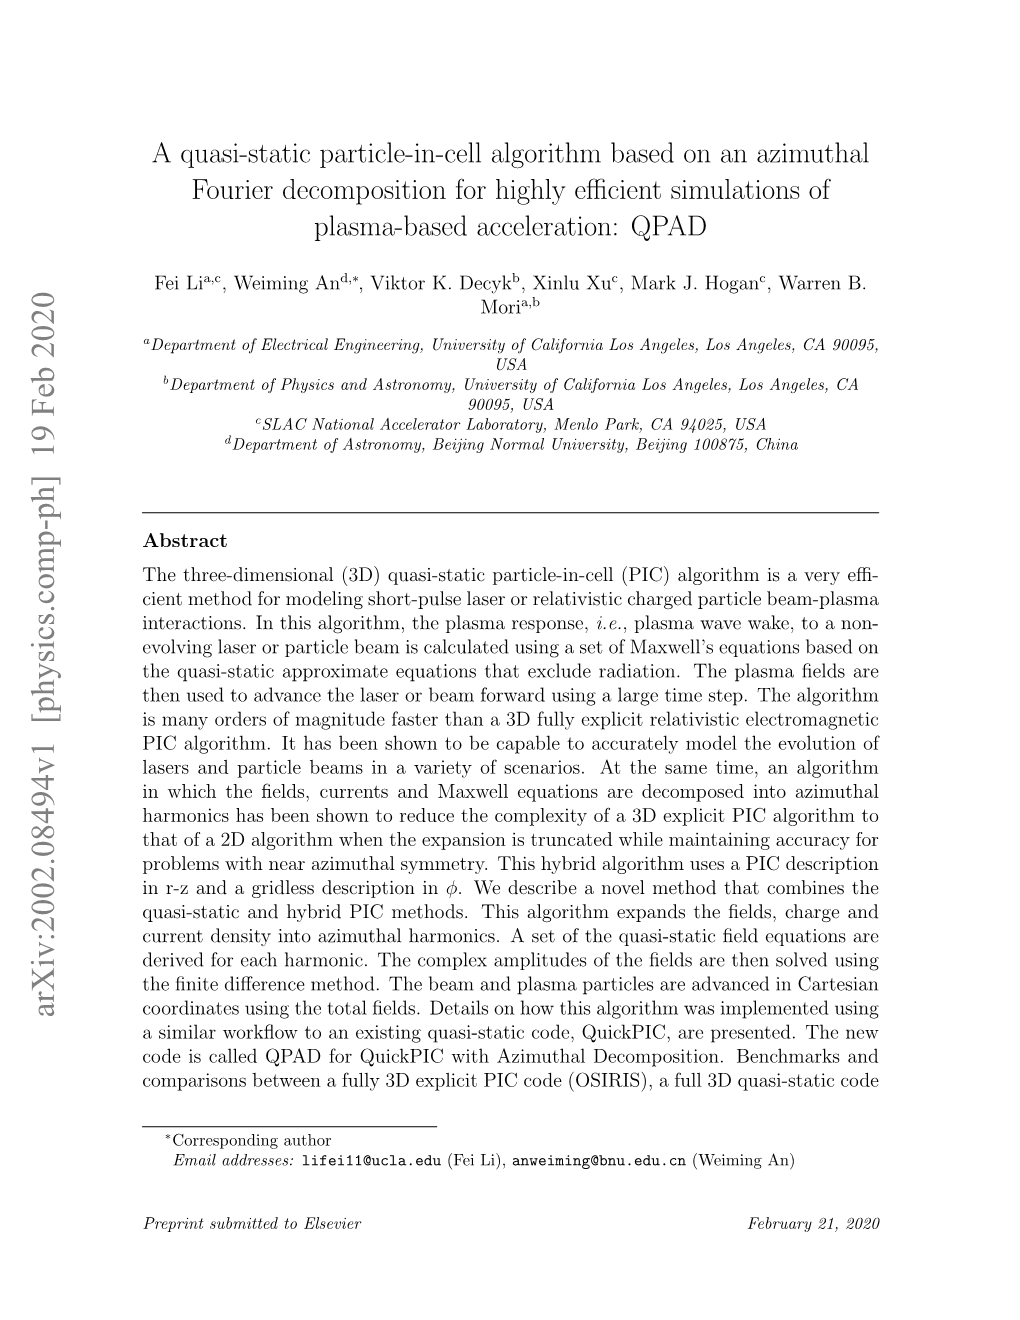 A Quasi-Static Particle-In-Cell Algorithm Based on an Azimuthal Fourier Decomposition for Highly Efficient Simulations of Plasma-Based Acceleration